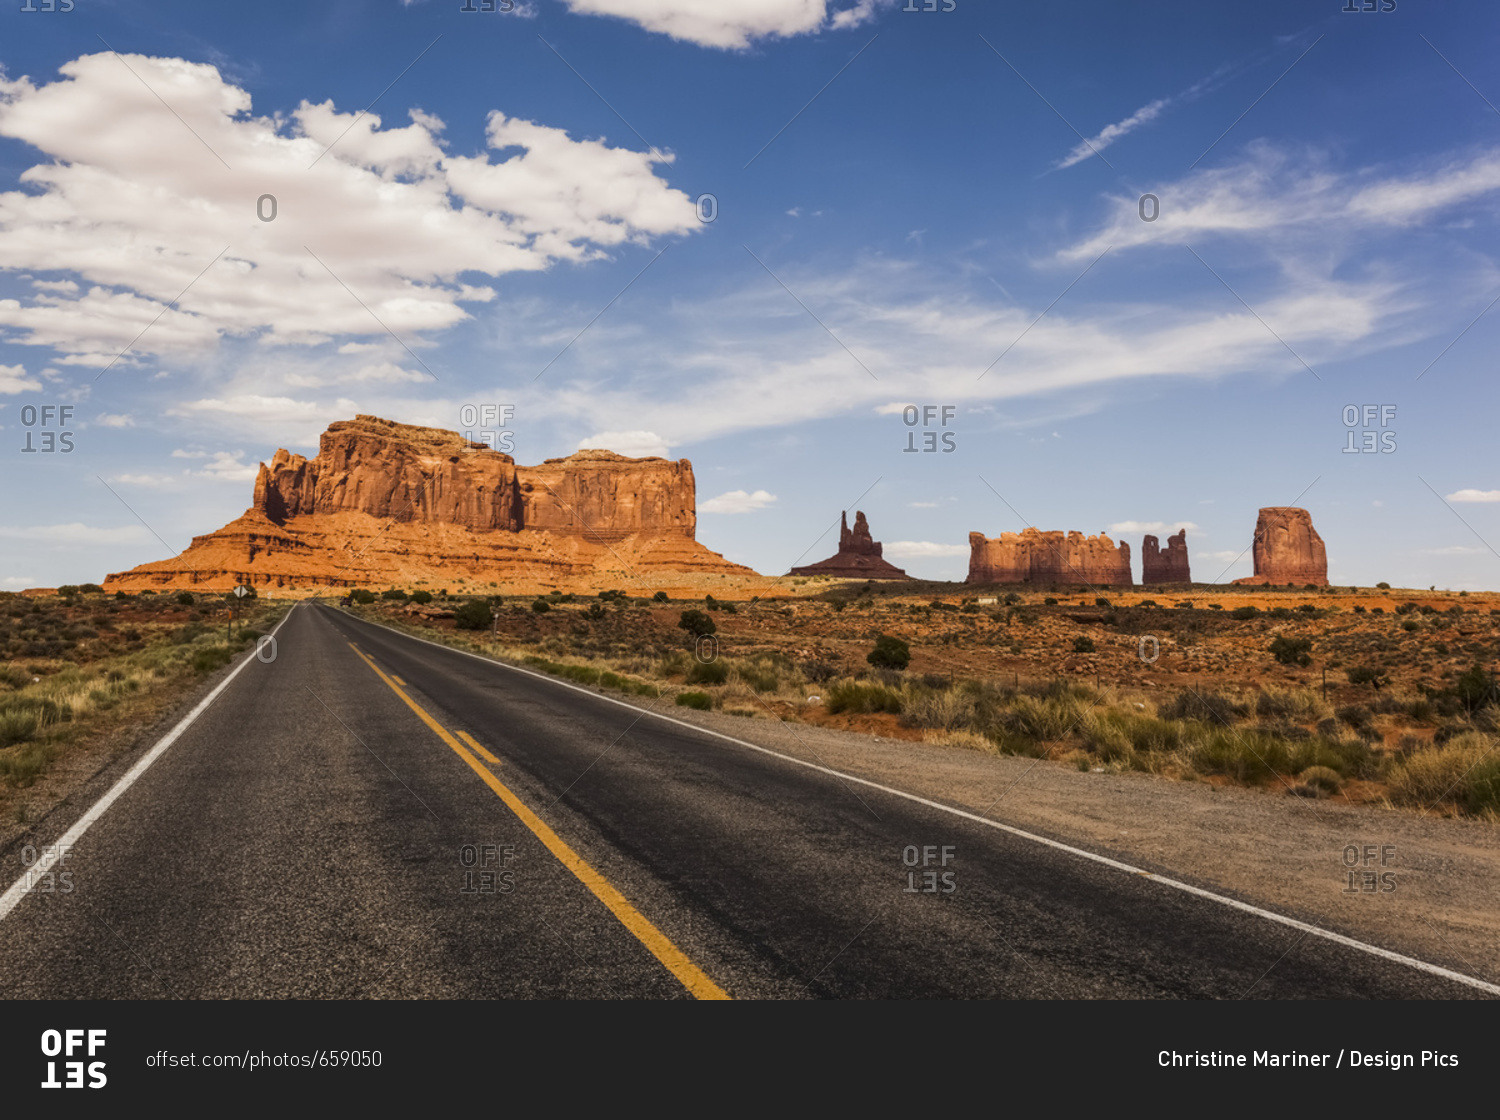 A Road Leading To Rugged Rock Formations In The Desert; Arizona, United States Of America